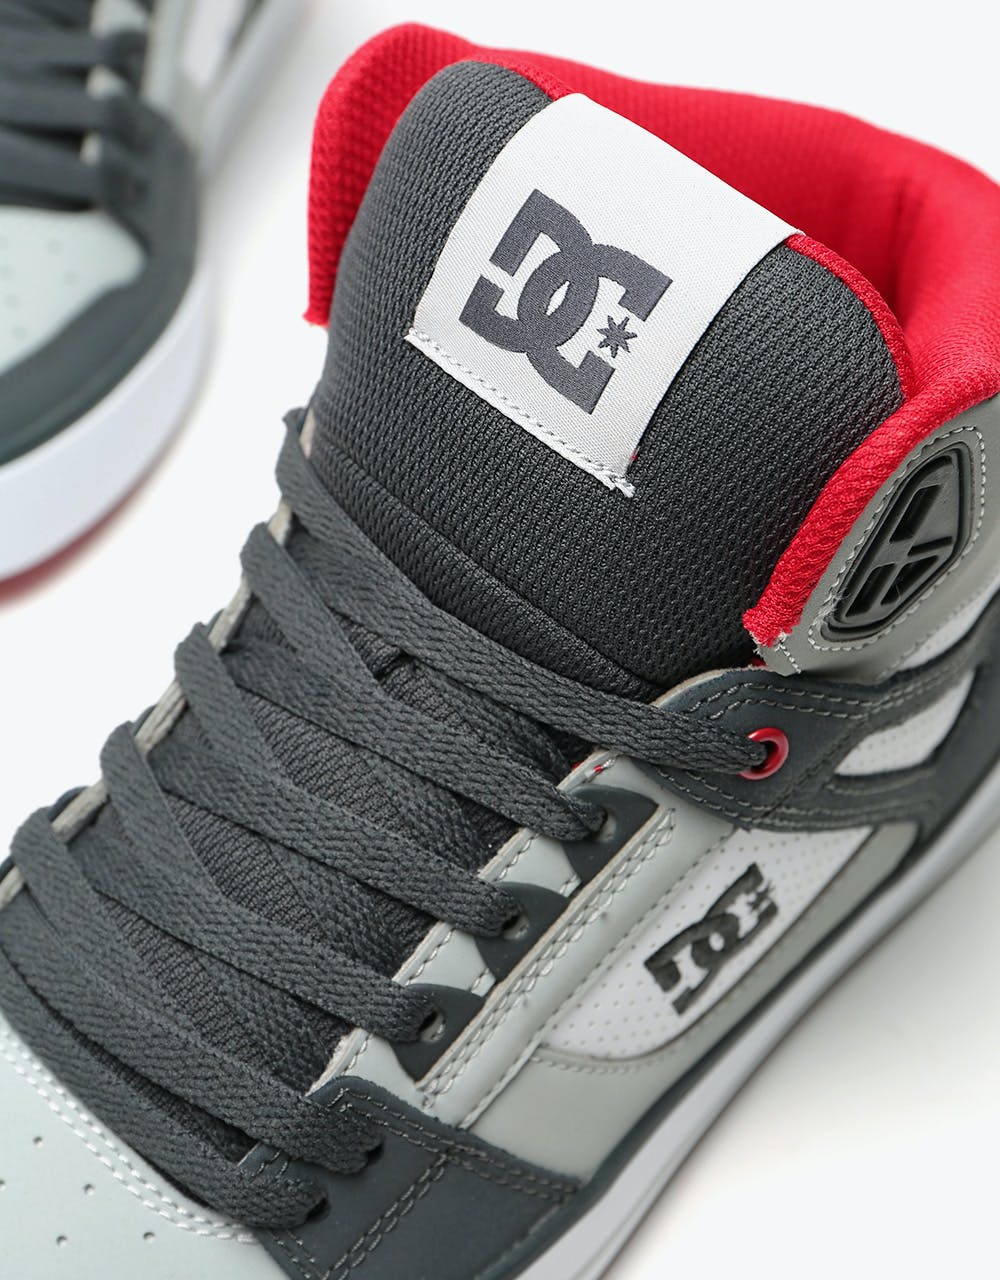 DC Pure High-Top WC Skate Shoes - Grey/Red/White